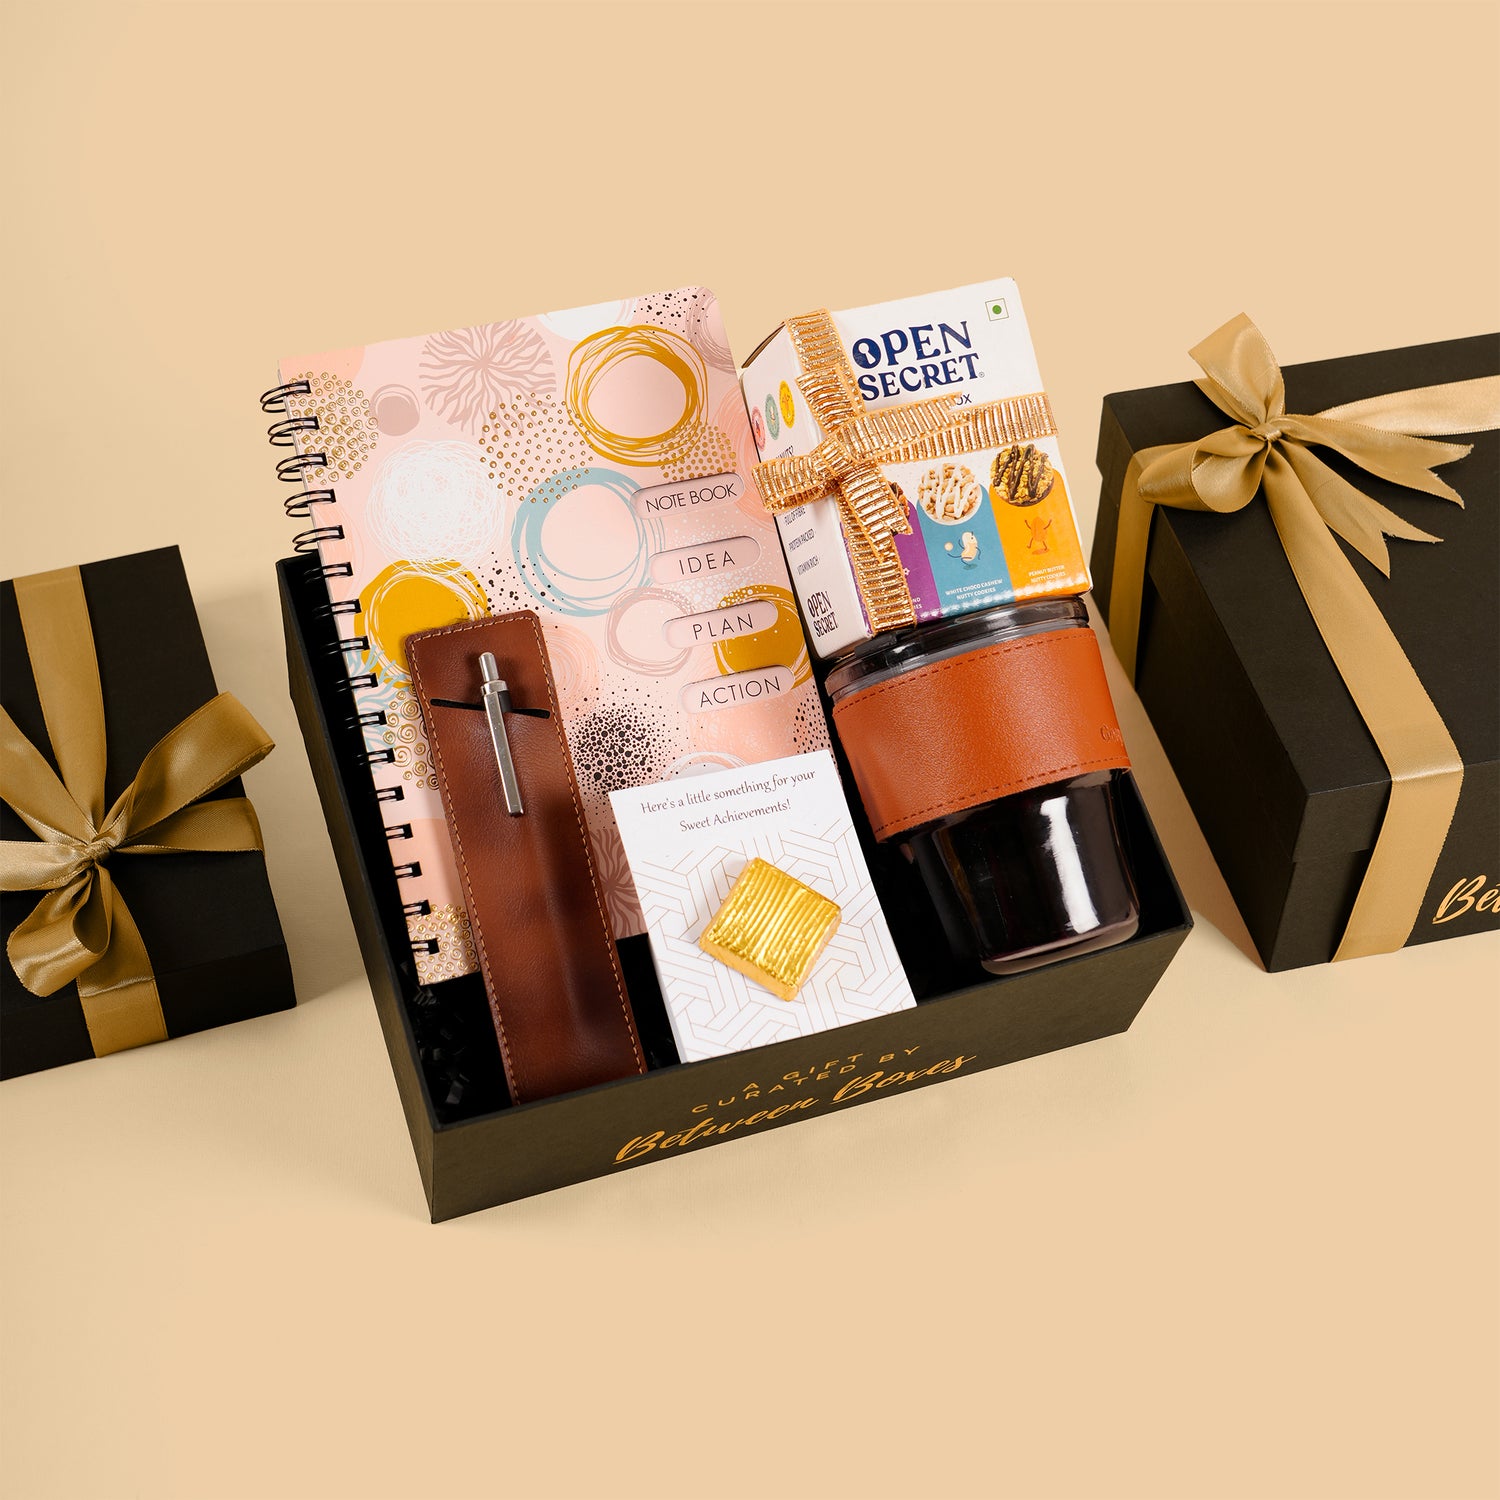 High Achiever Gift Hamper - Between Boxes Gifts